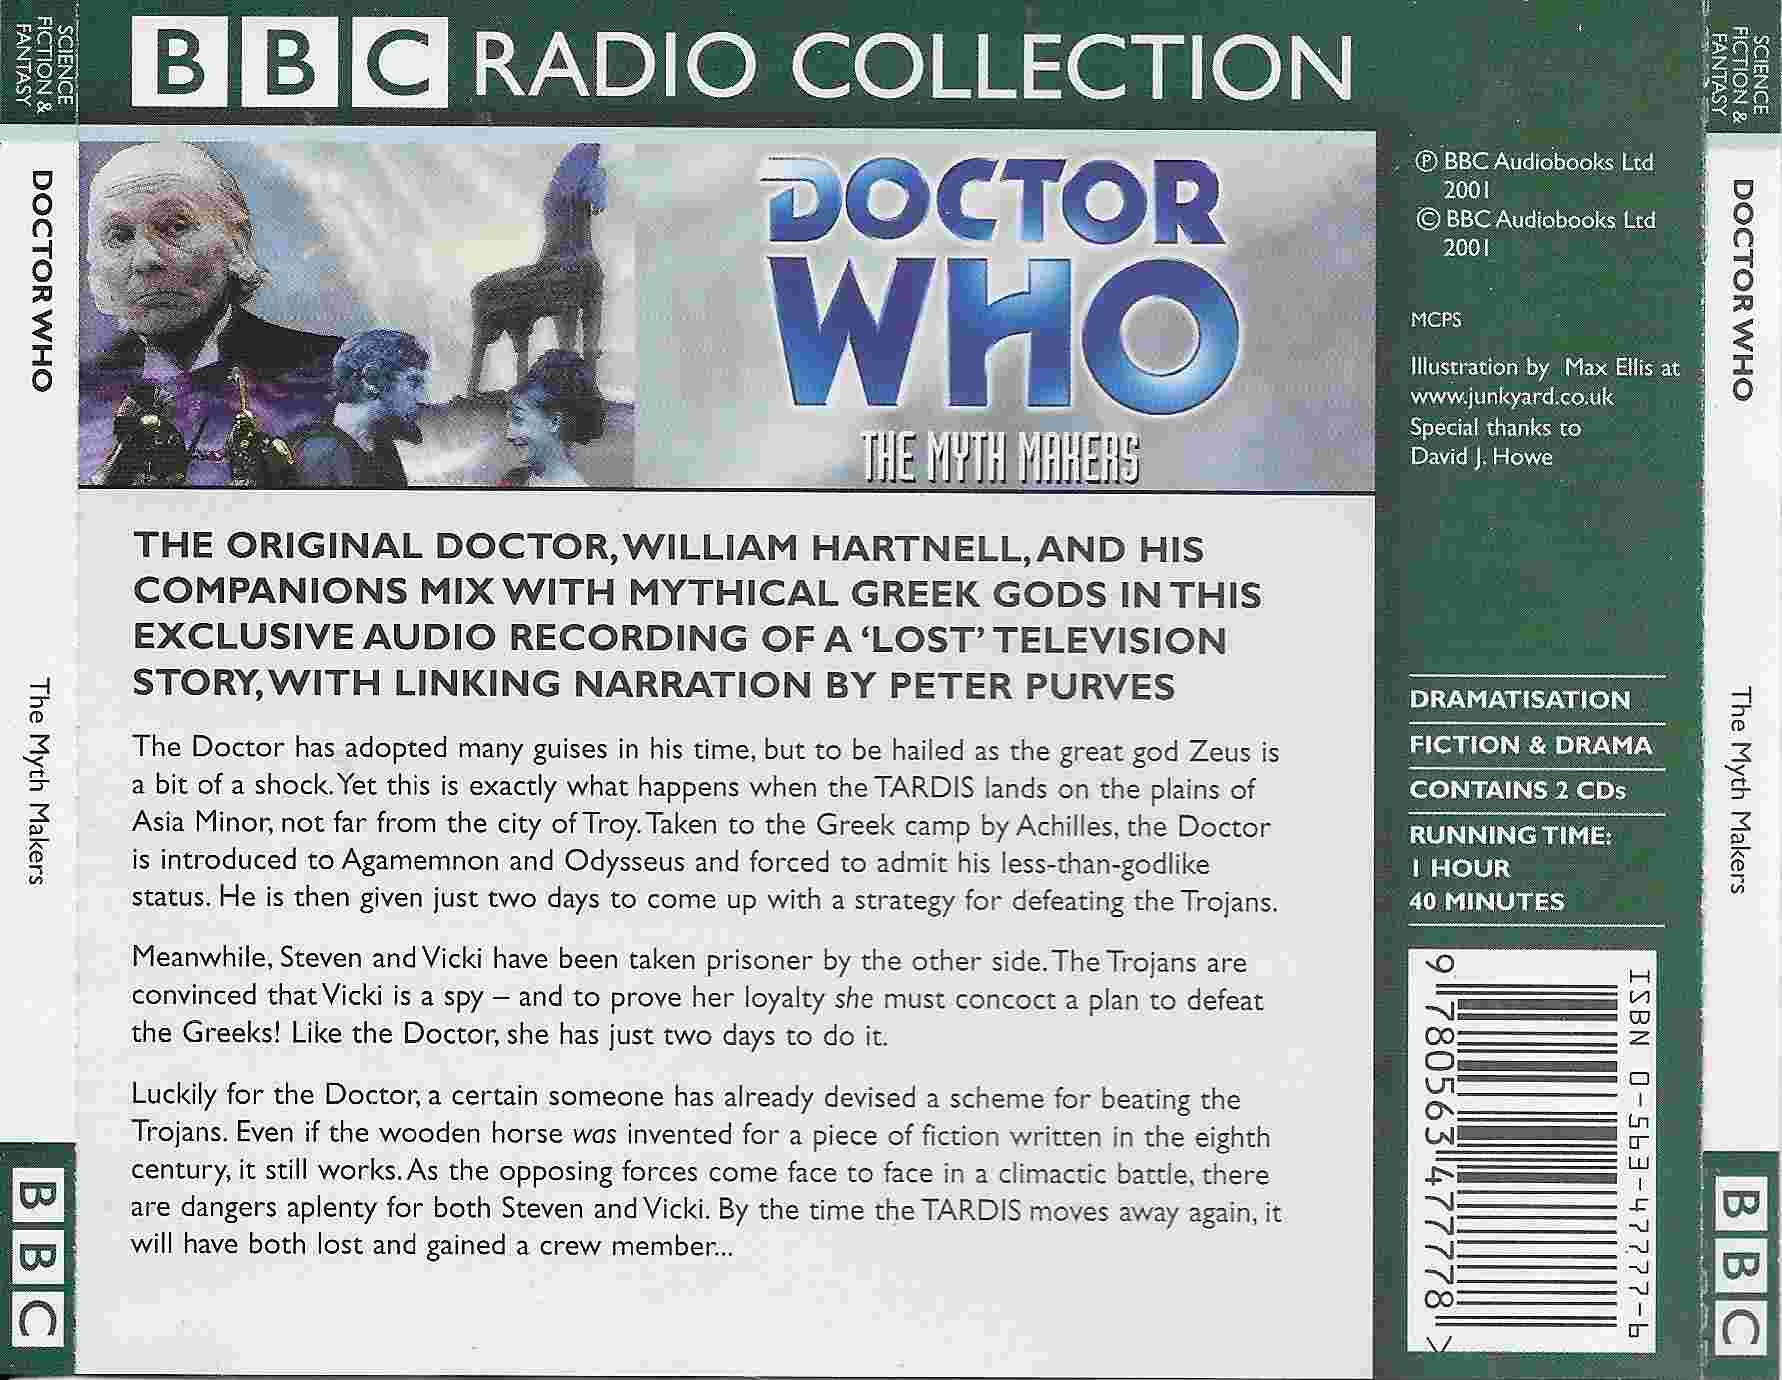 Picture of ISBN 0-563-47777-6 Doctor Who - The myth makers by artist Donald Cotton from the BBC records and Tapes library